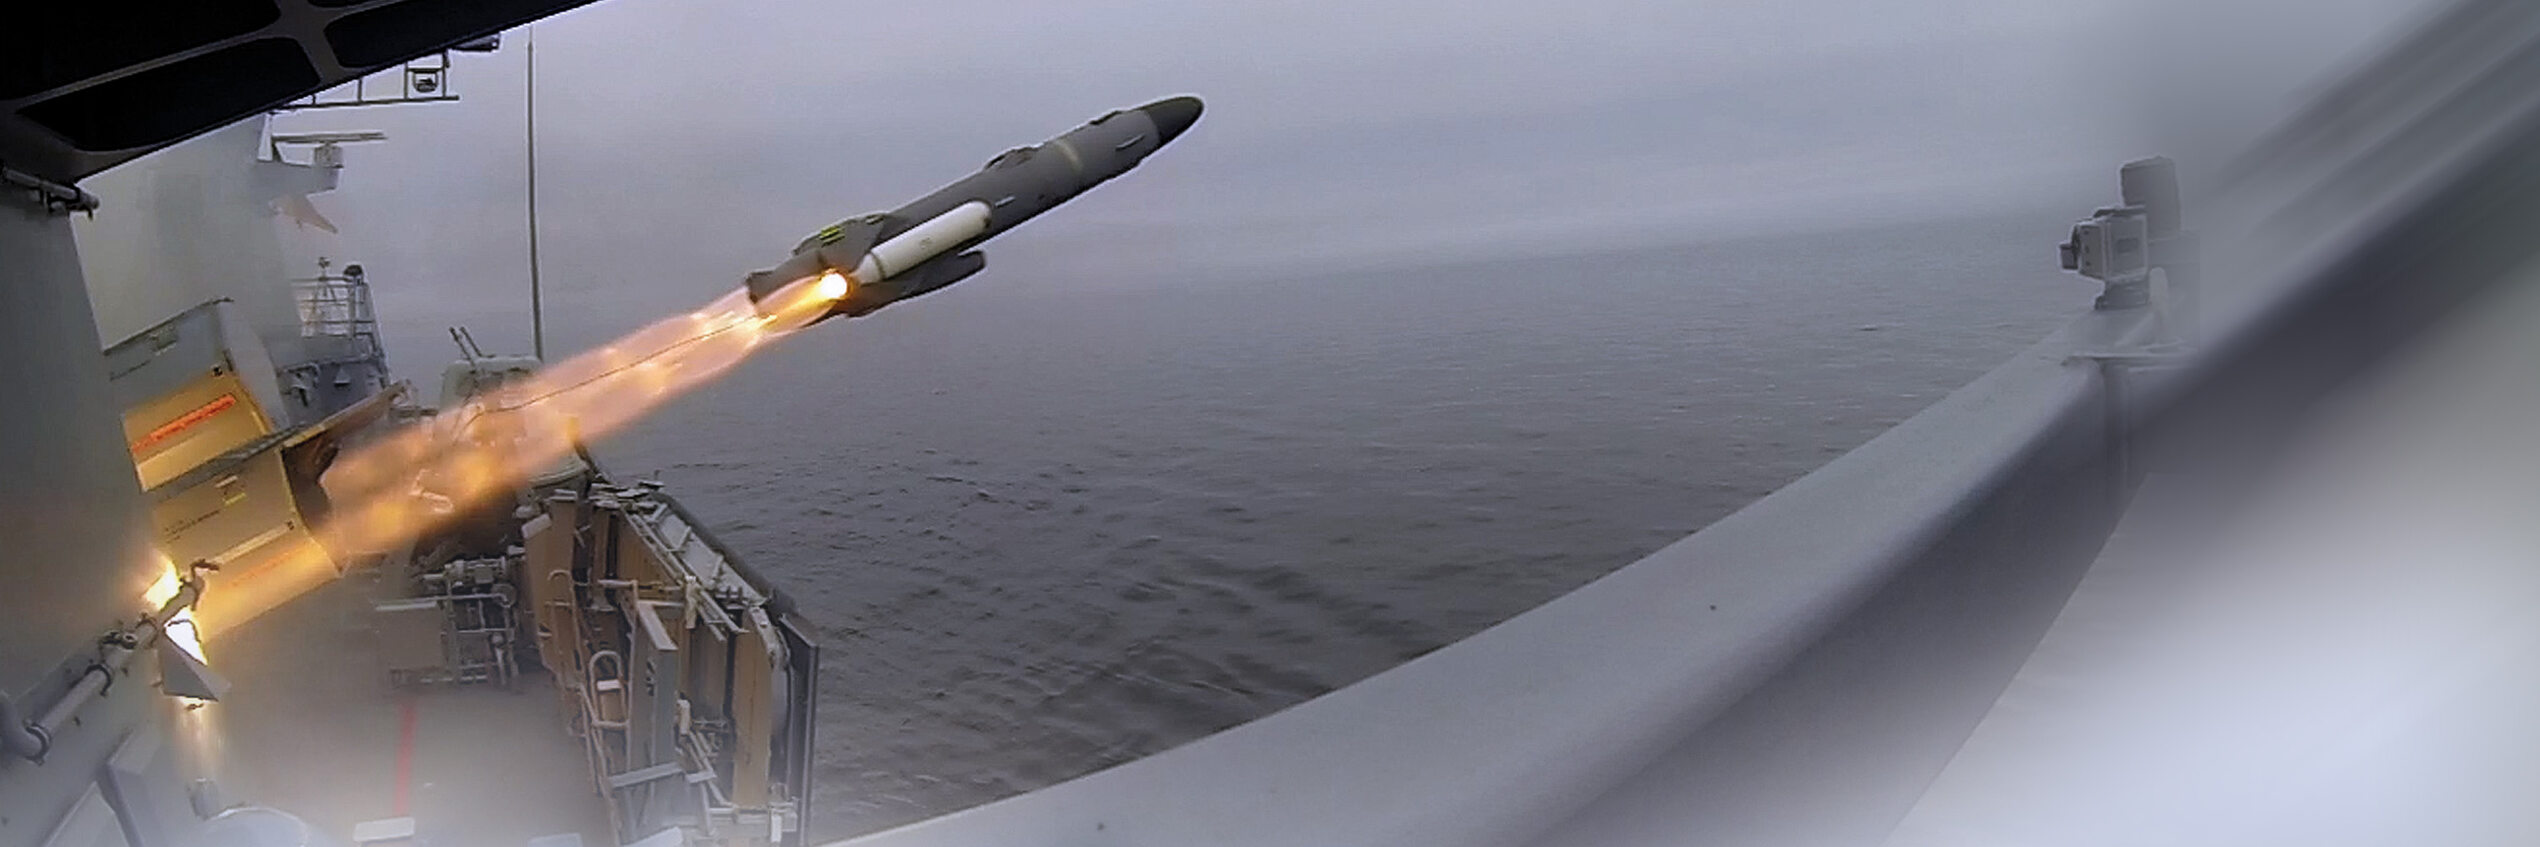 Diehl delivers further anti-ship missiles to German Navy